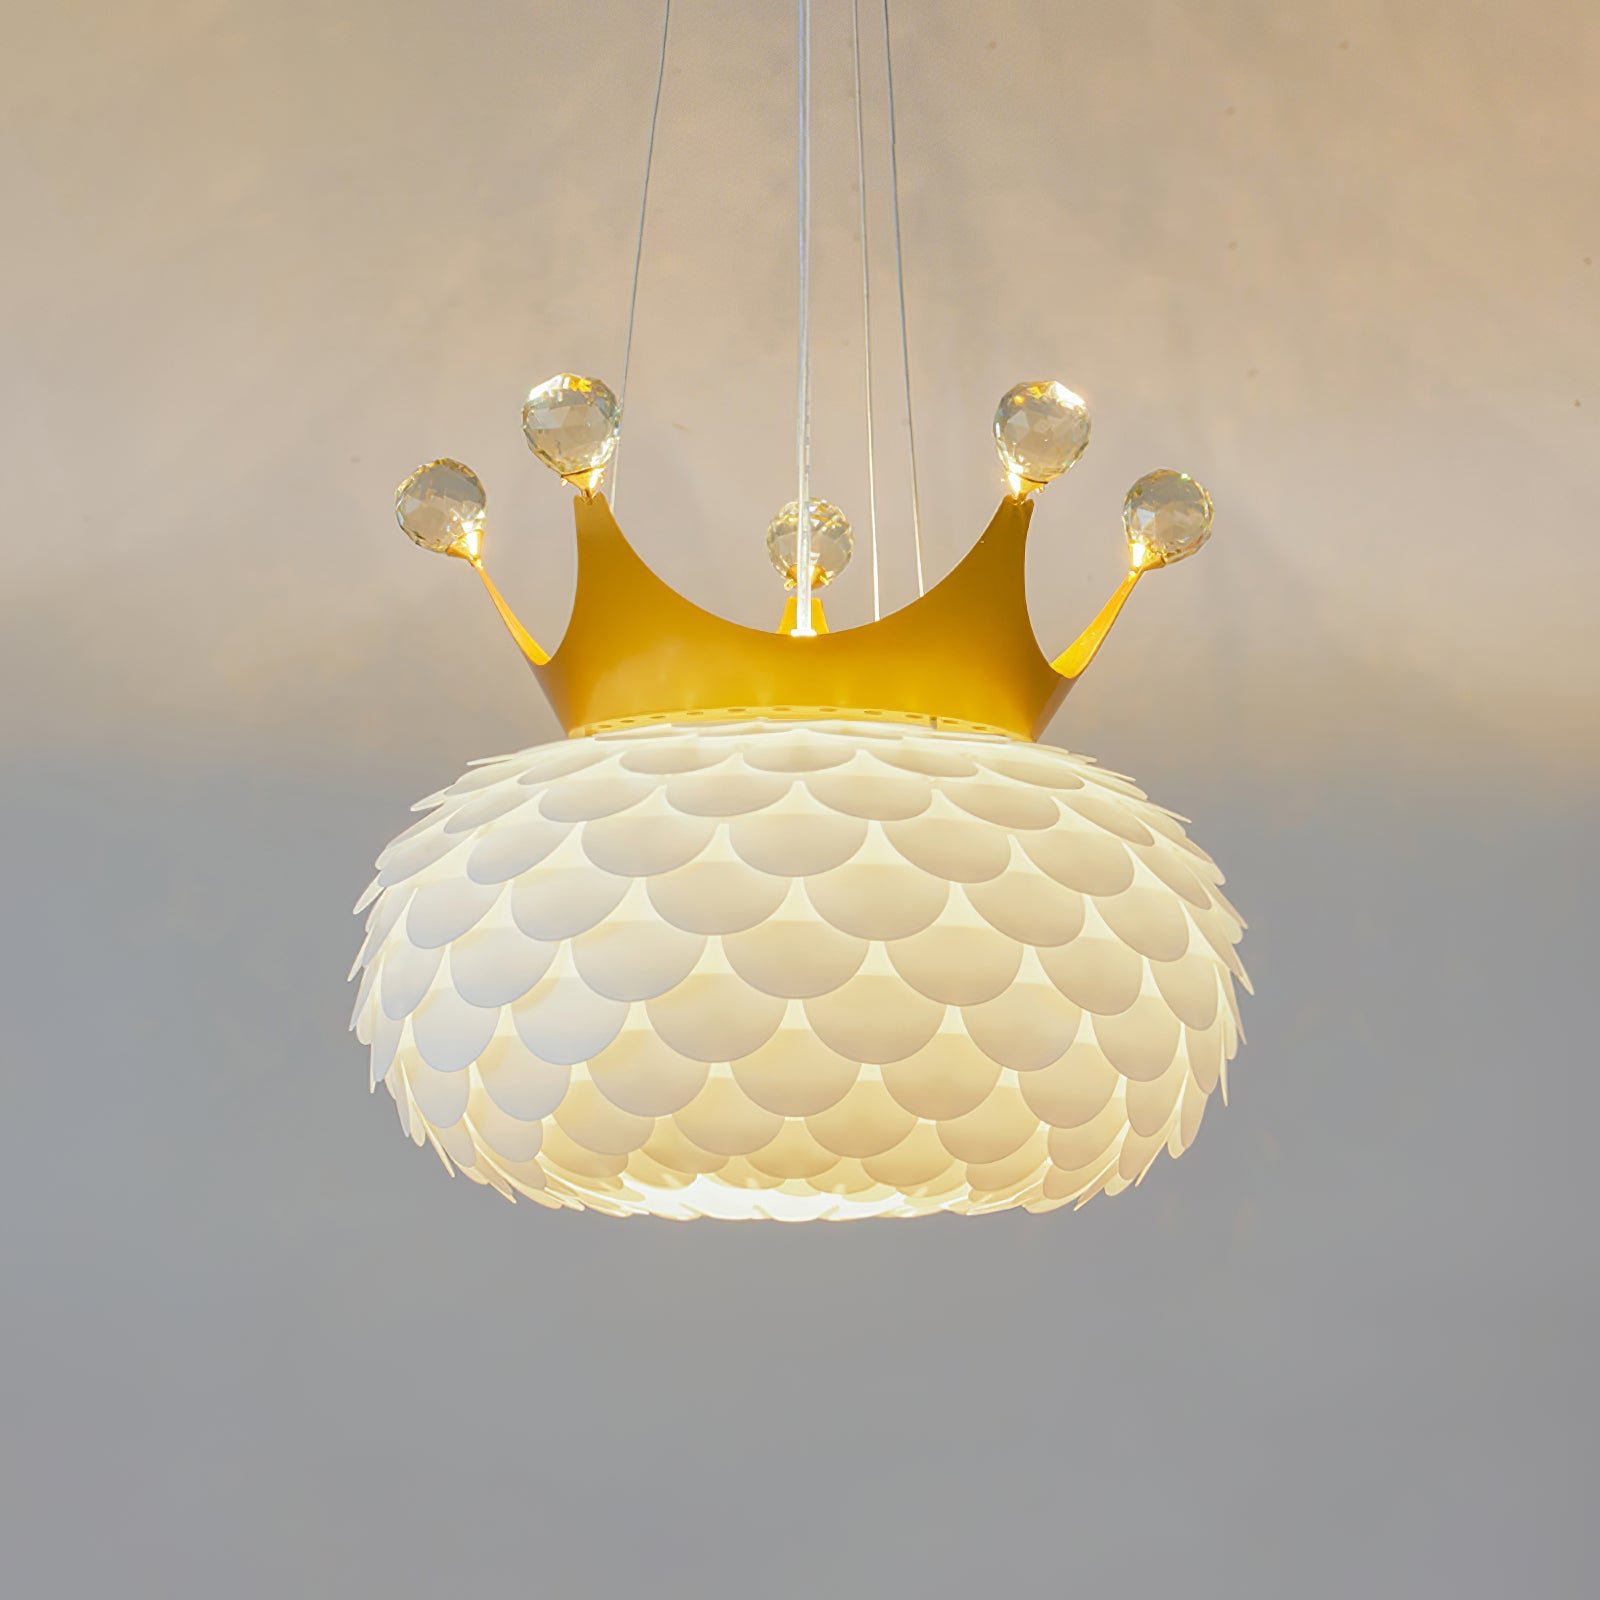 Golden Aluvia Crown Pendant Lamp, measuring 11.8 inches in diameter and 16.5 inches in height (or 30cm x 42cm).